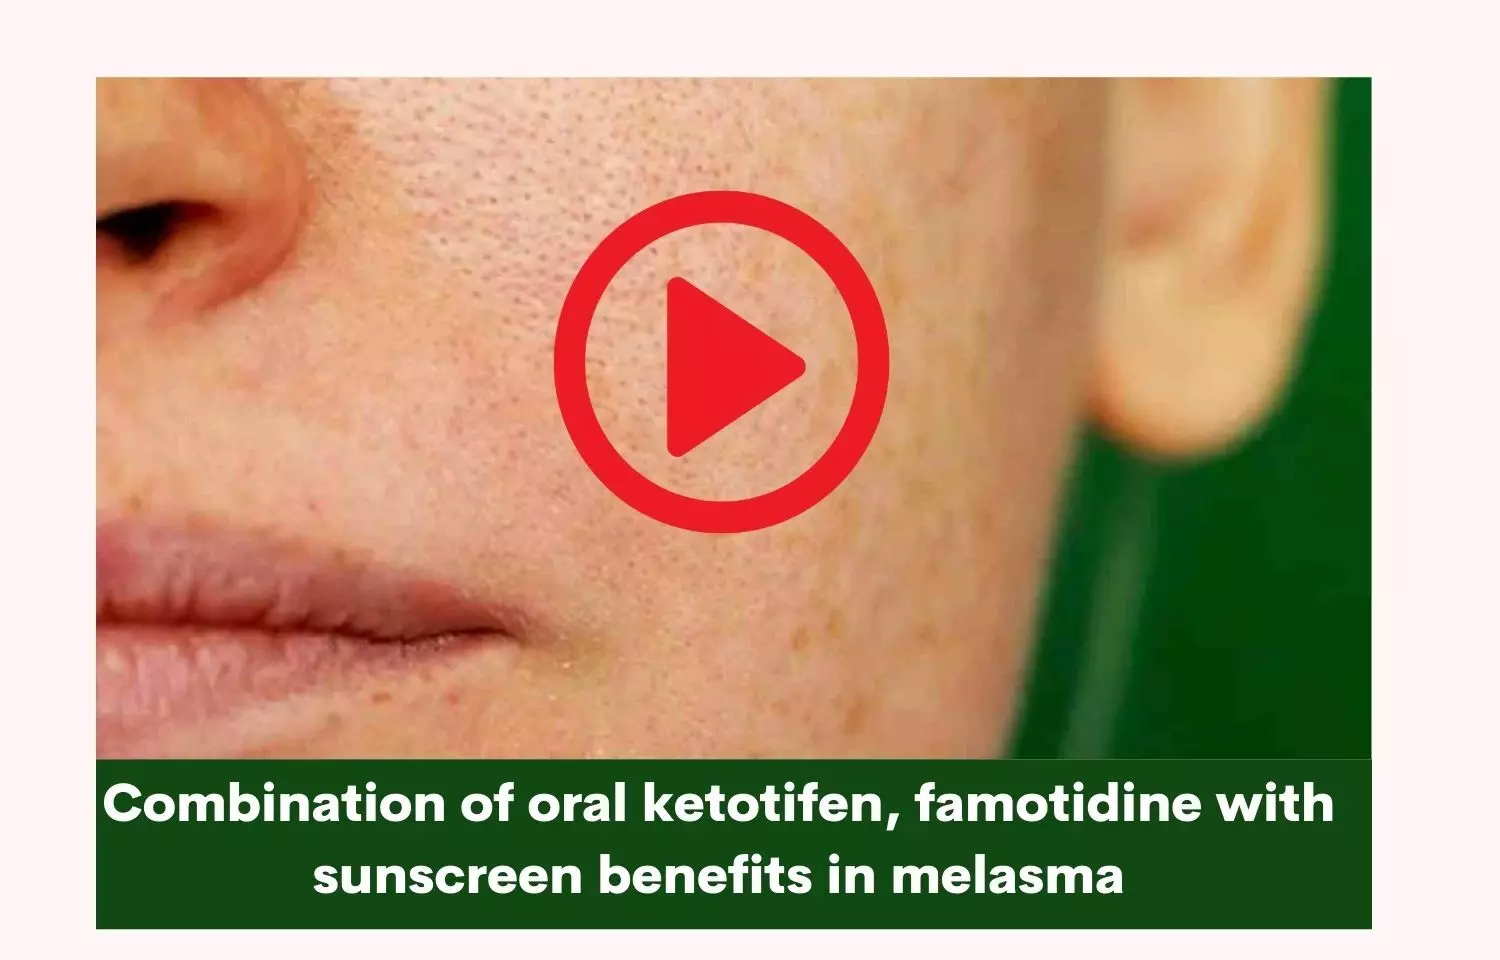 Combination of oral ketotifen, famotidine with sunscreen benefits in melasma